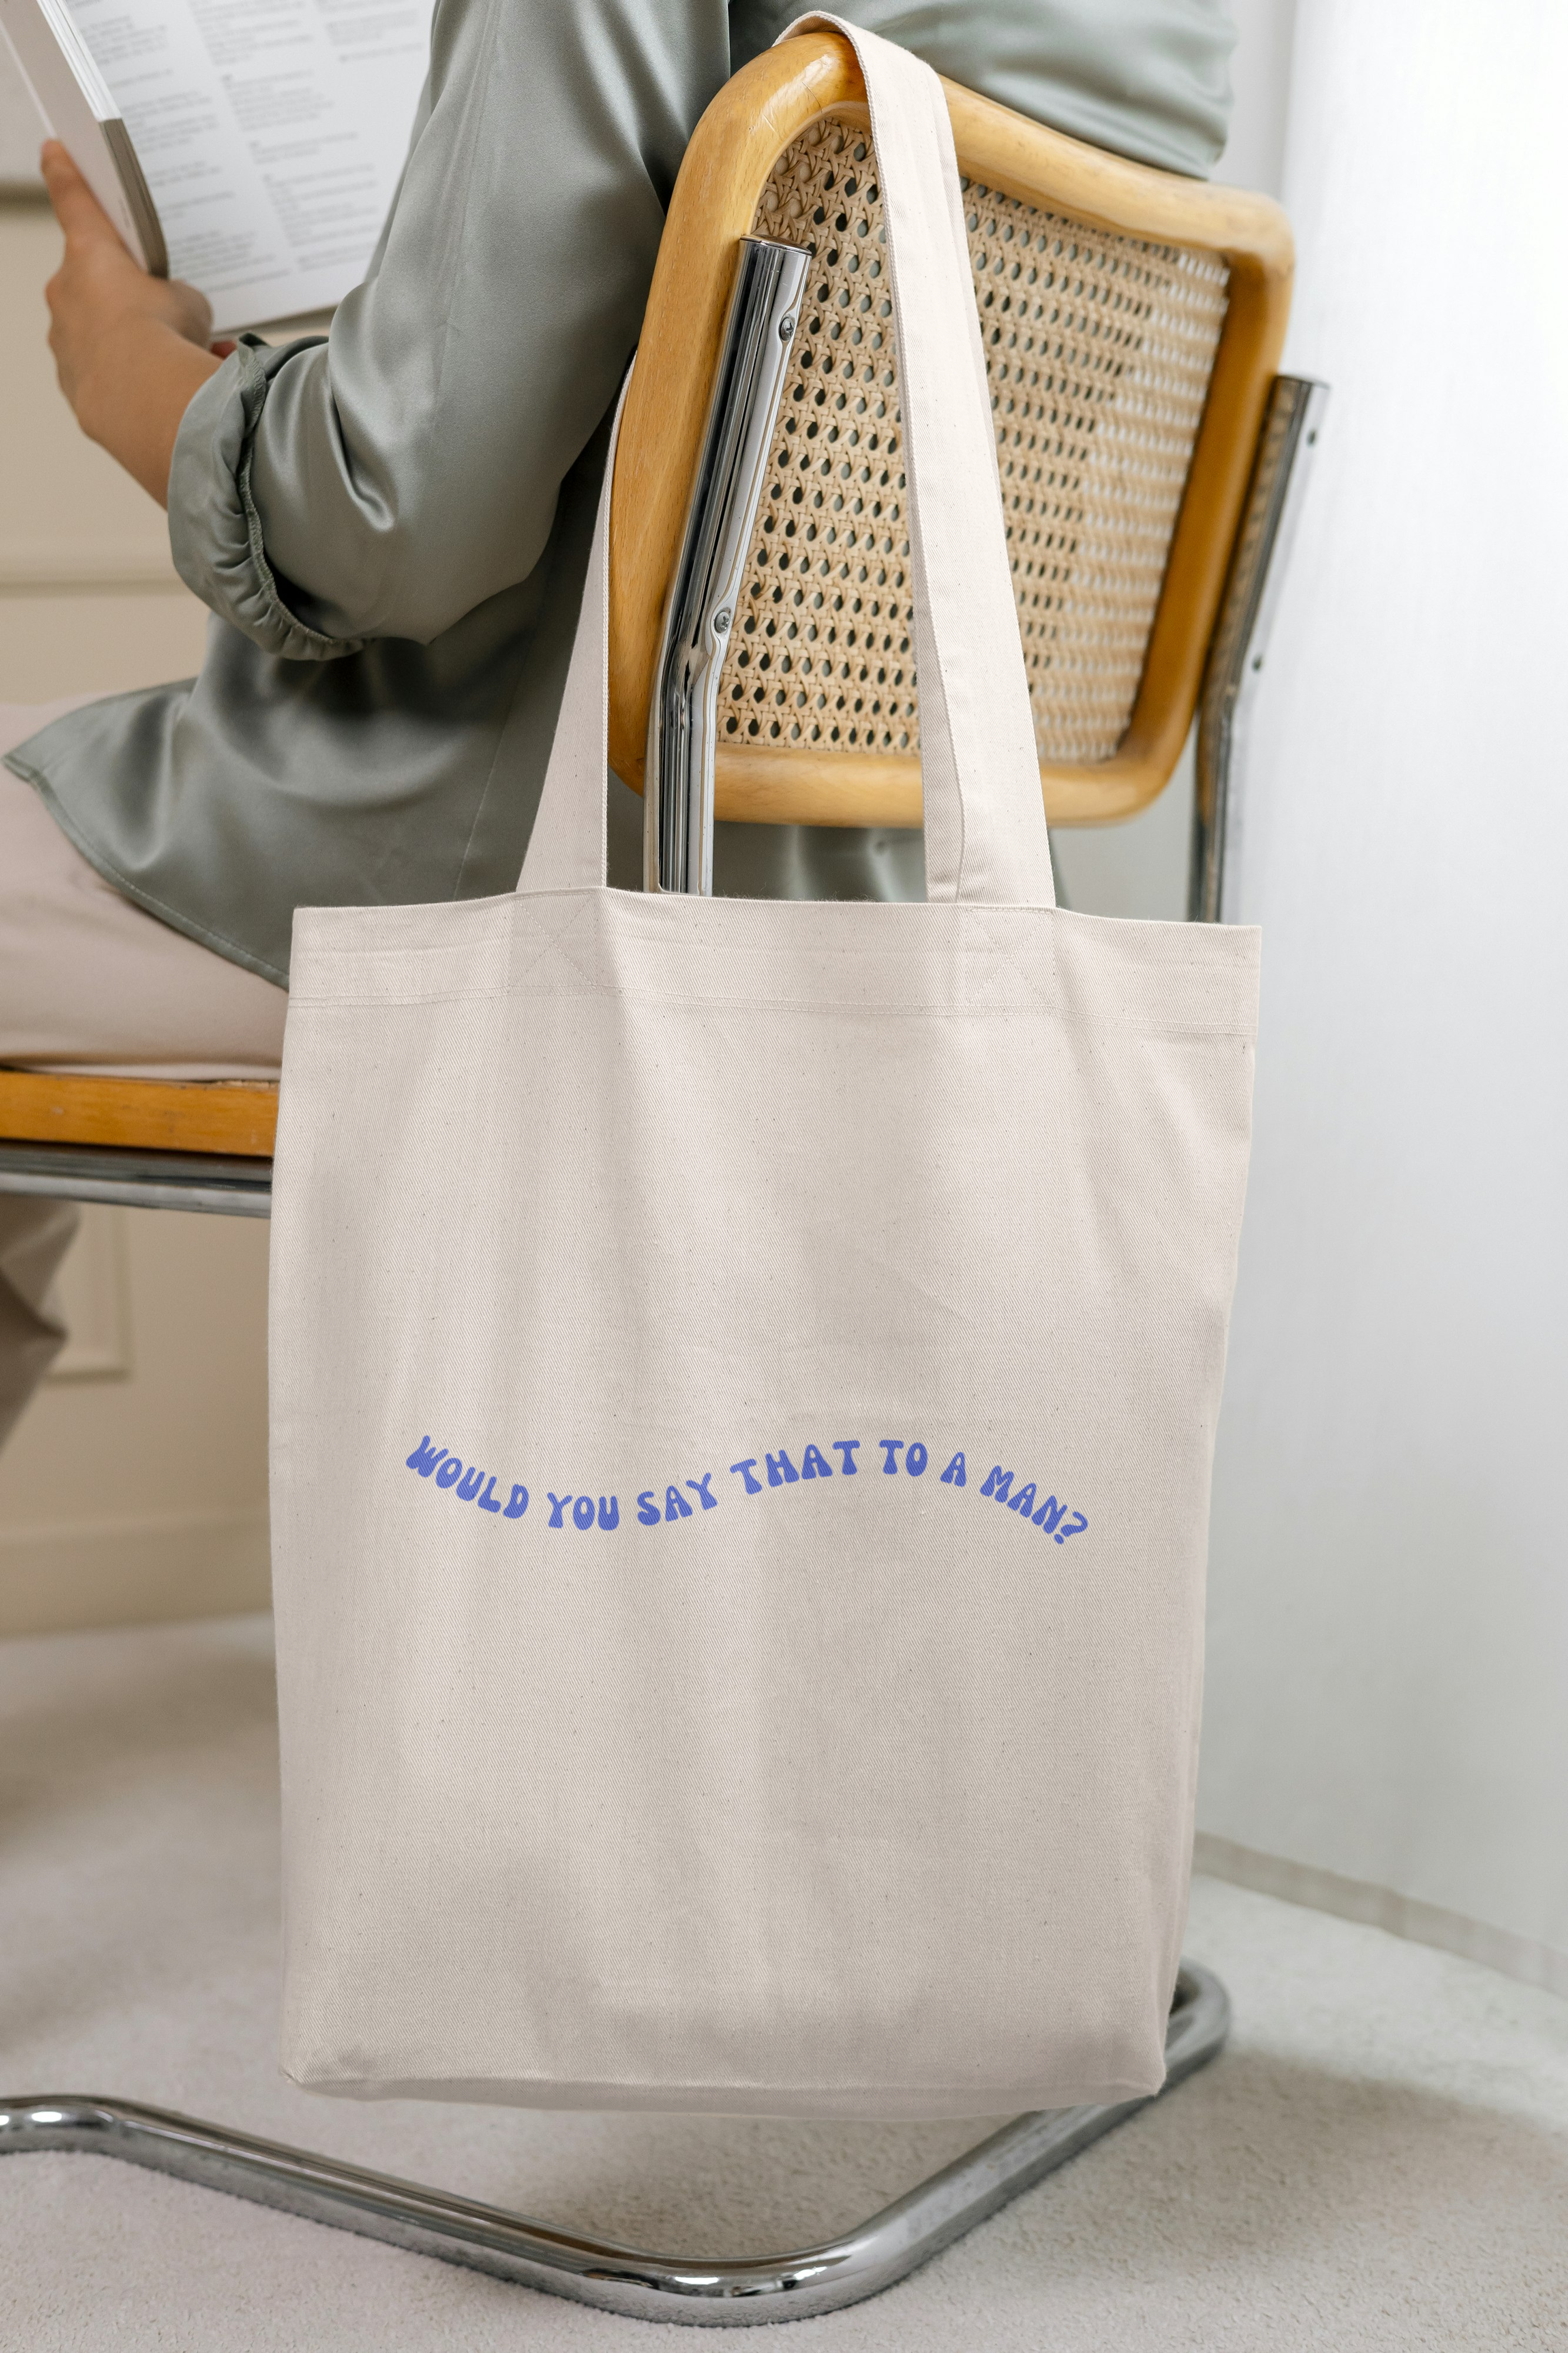 Would You Say That To A Man? Tote Bag